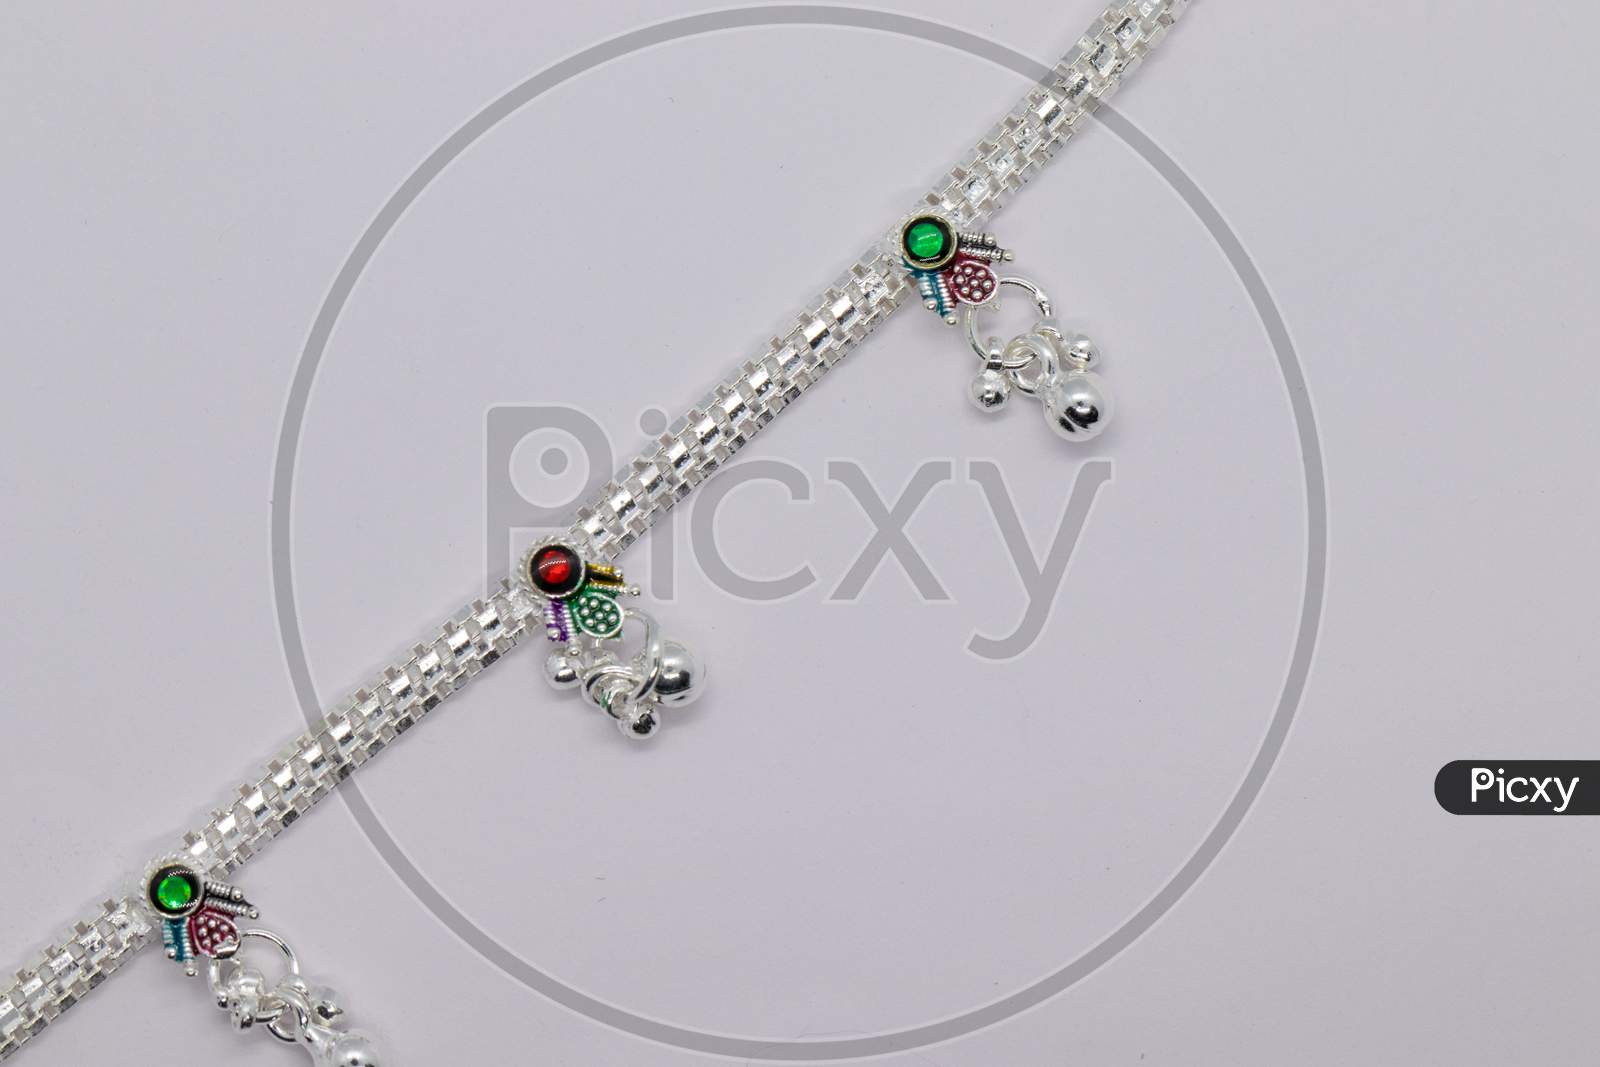 One Silver Leg Chain With Anklets For Design (Anklet)